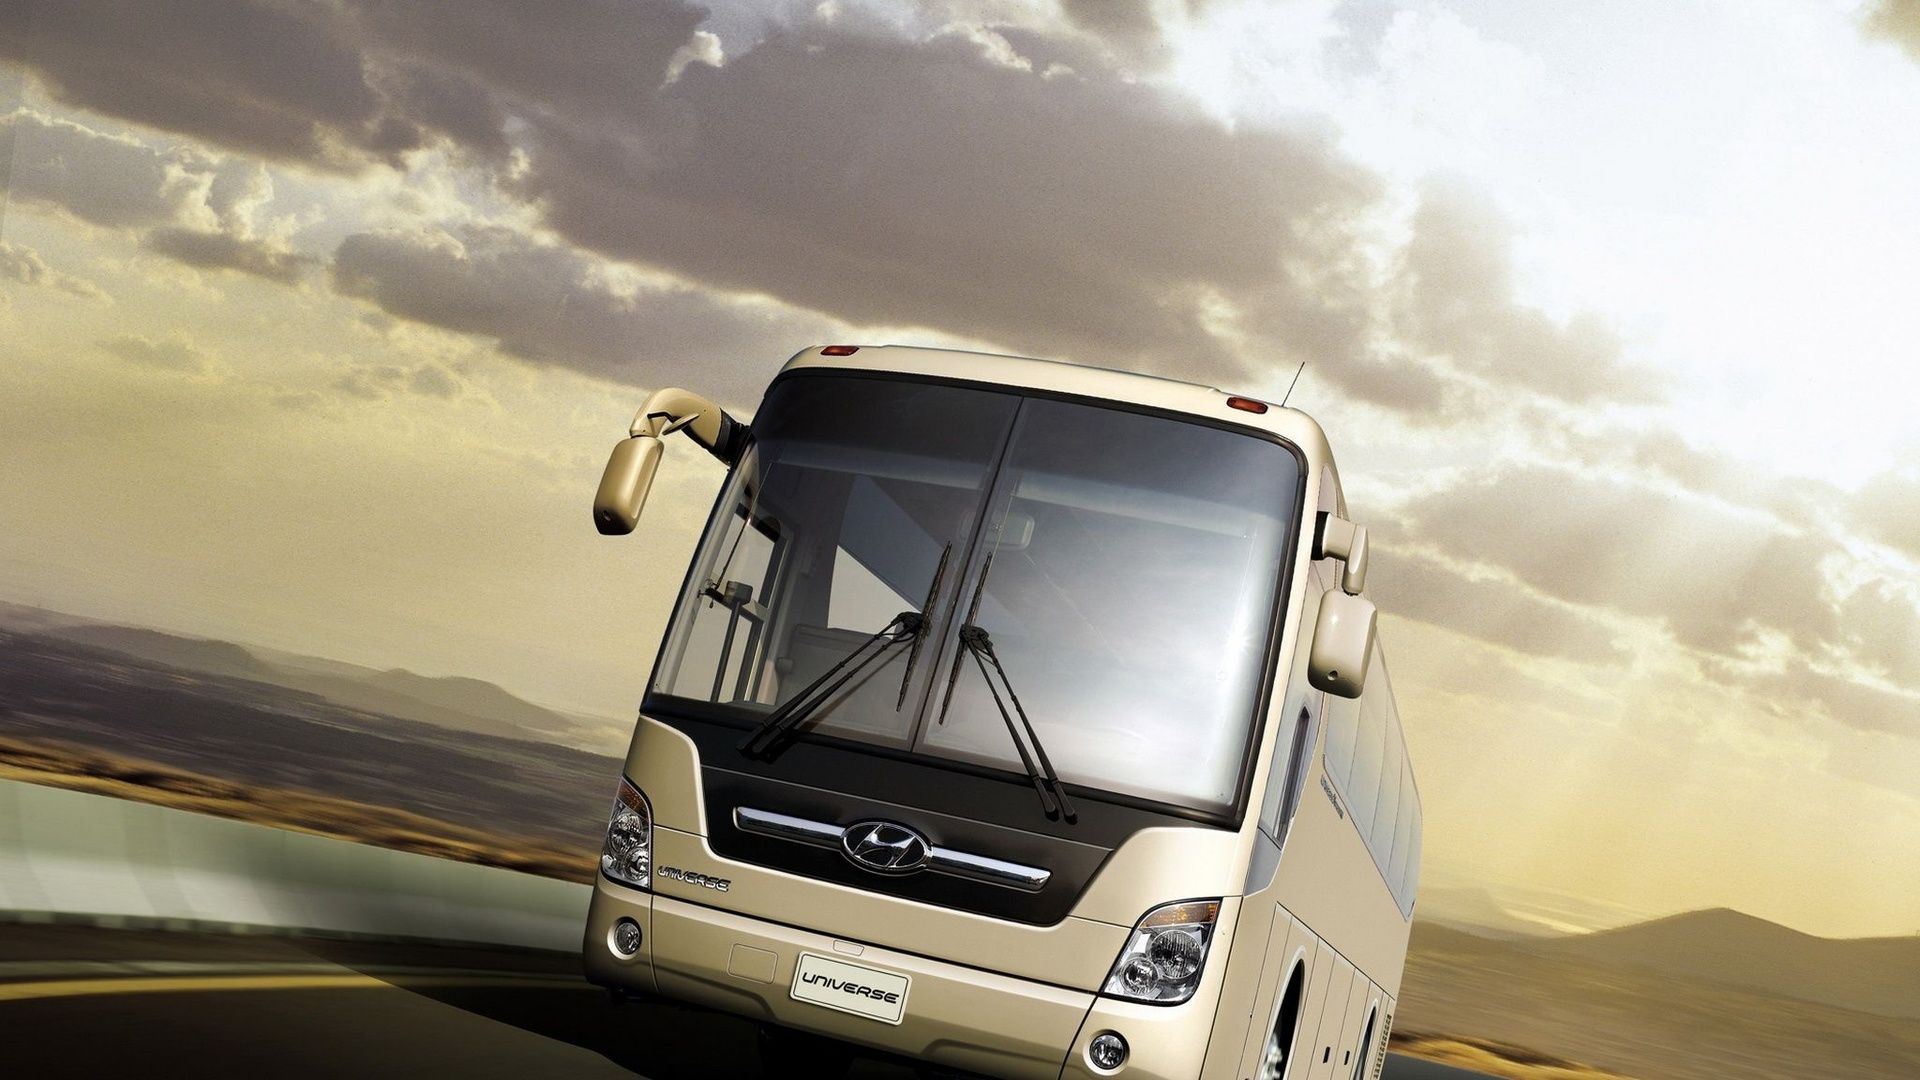 travel bus images hd